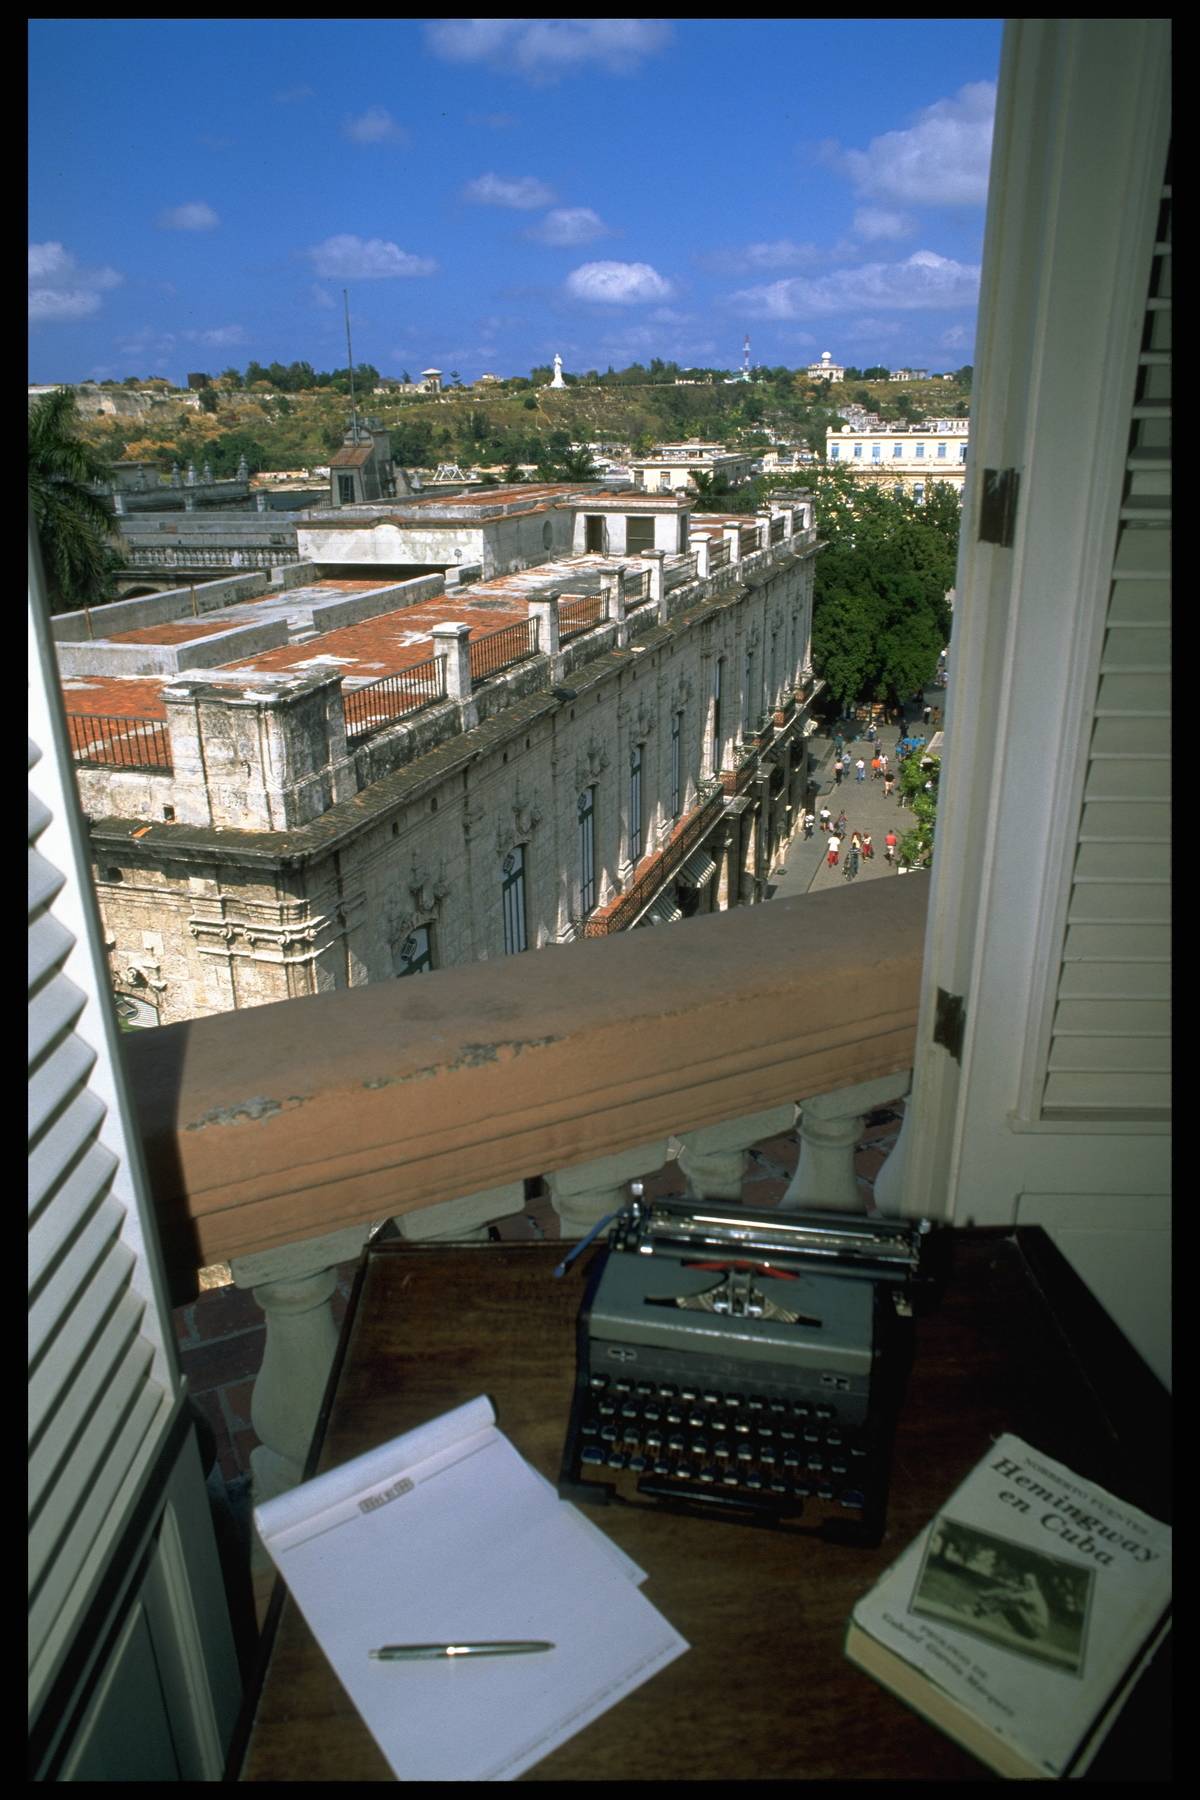 <p>Those people who enjoy Ernest Hemingway need to be sure to check out this hidden gem in Havana: the room he stayed in at the Ambos Mundos hotel. Kept in pristine condition, visitors can go to the room and see the author's typewriter, glasses, writing table, and various other memorabilia.</p> <p>He stayed at the hotel from 1932 until 1939, completing the first few chapters of his novel <em>For Whom the Bell Tolls.</em></p>